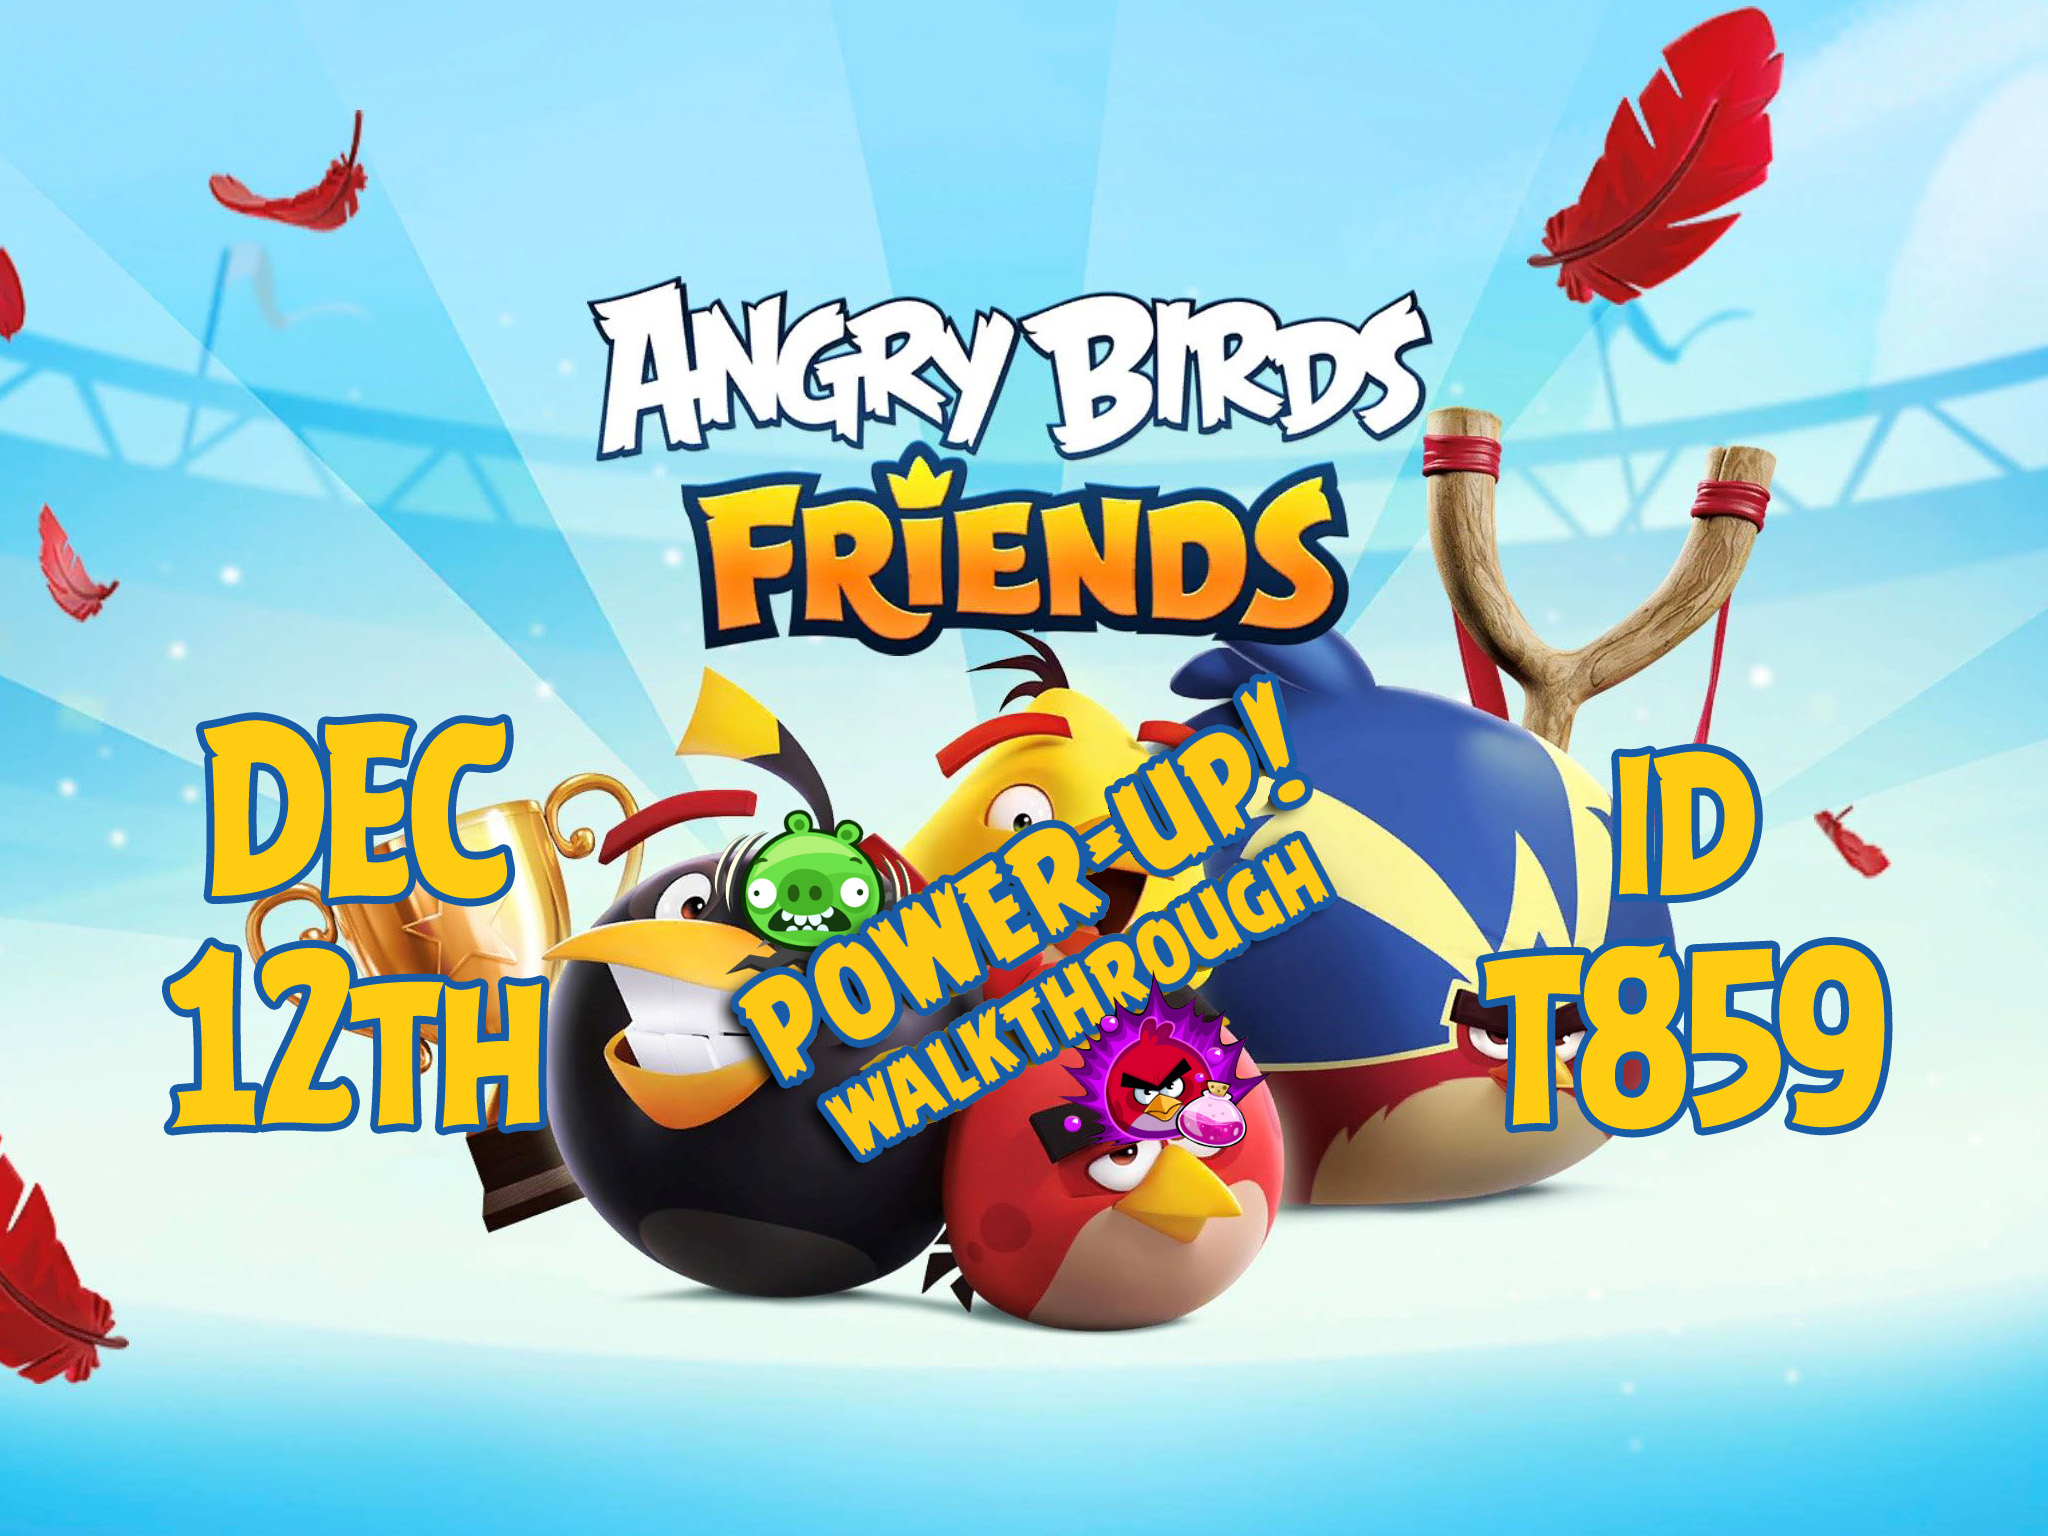 Angry-Birds-Friends-Tournament-T859-Feature-Image-PU